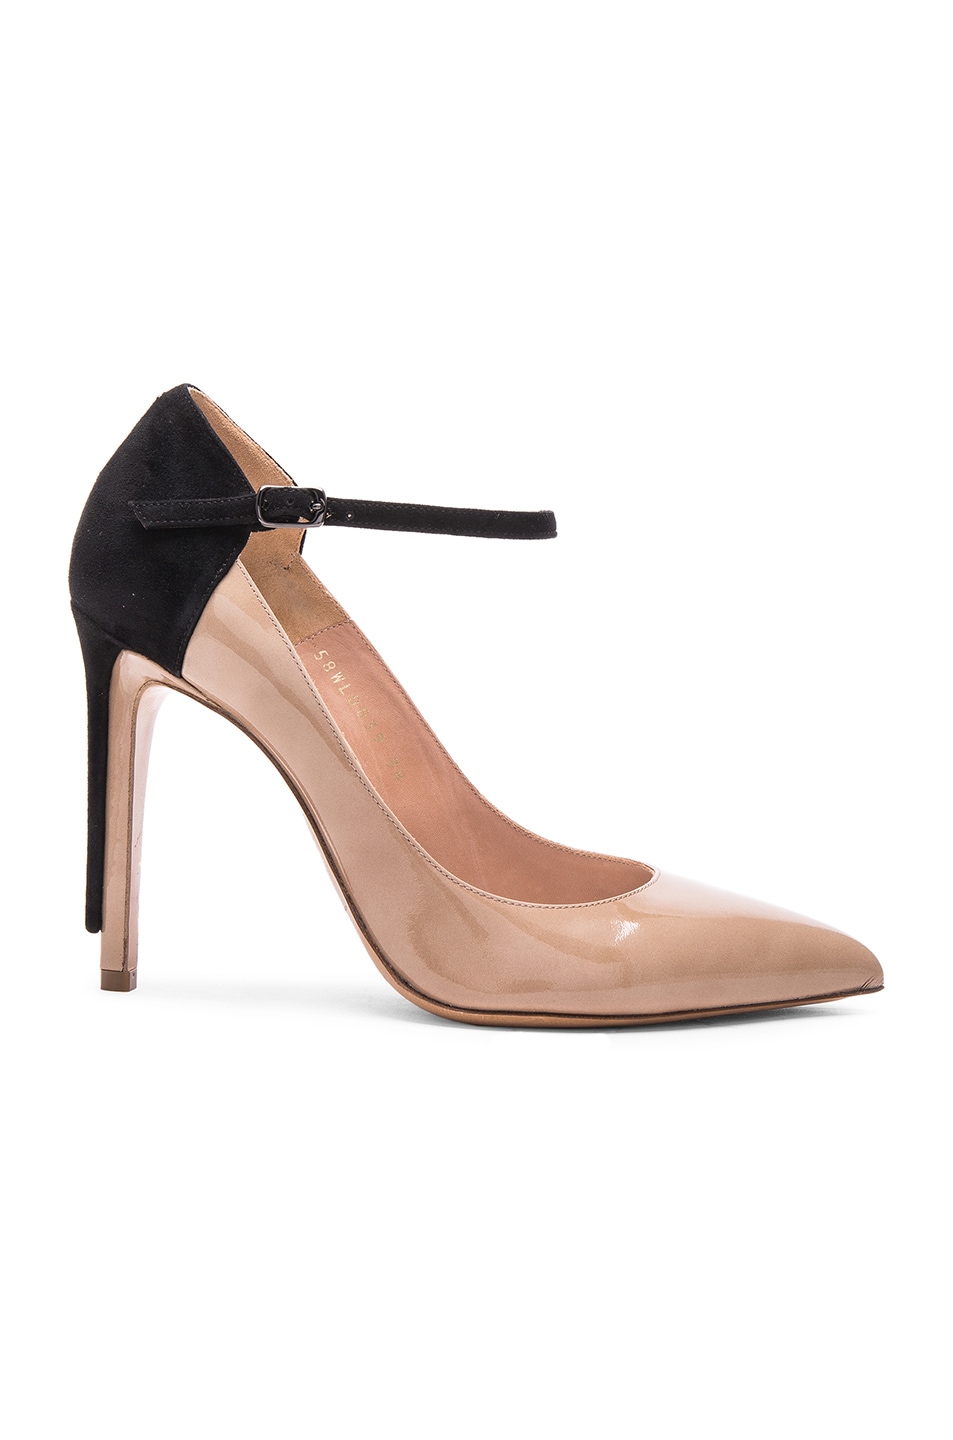 Image 1 of Maison Margiela Ankle Strap Patent Leather Heels in Nude & Black